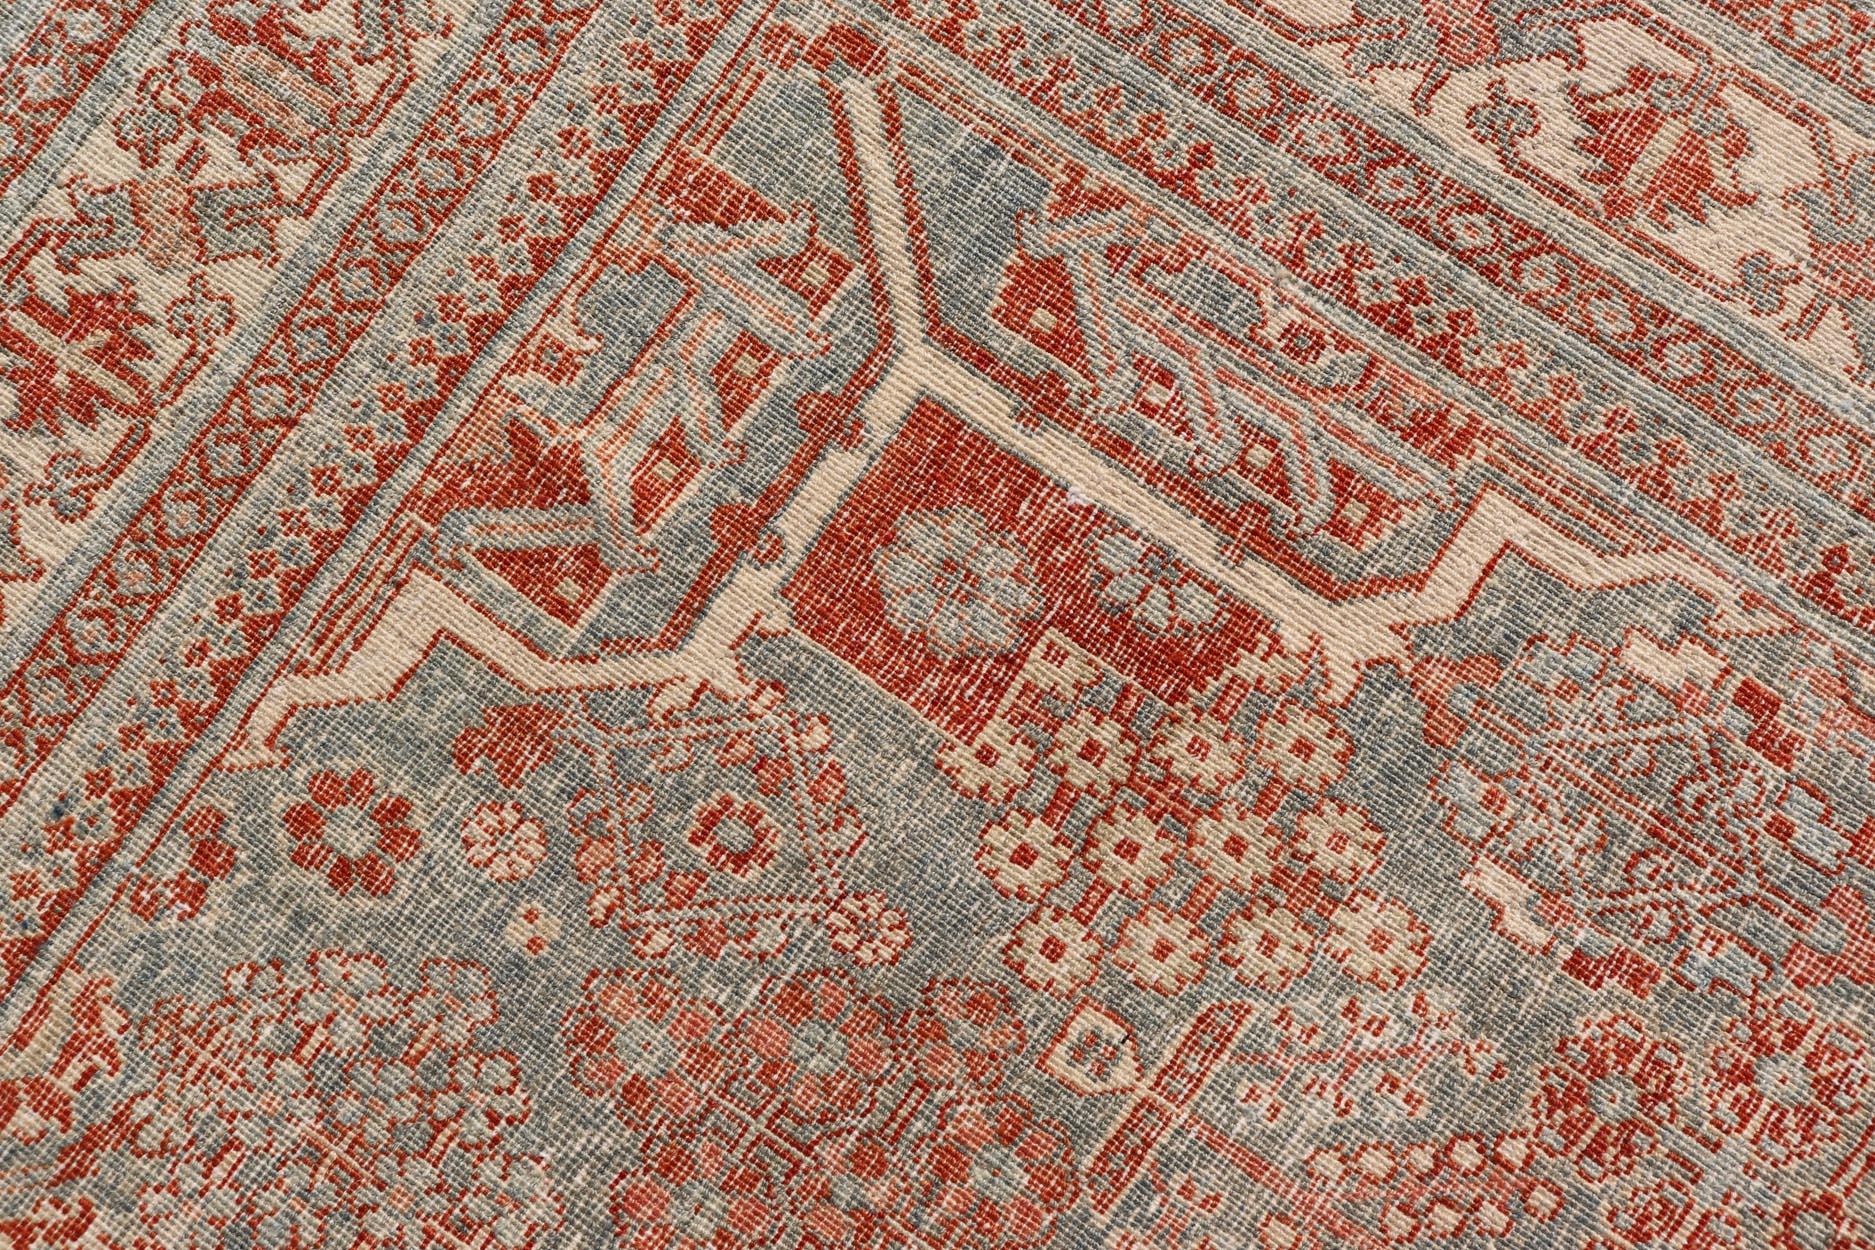 Wool Persian Antique Joshegan Rug with Geometric Medallion Design in Soft Red's For Sale